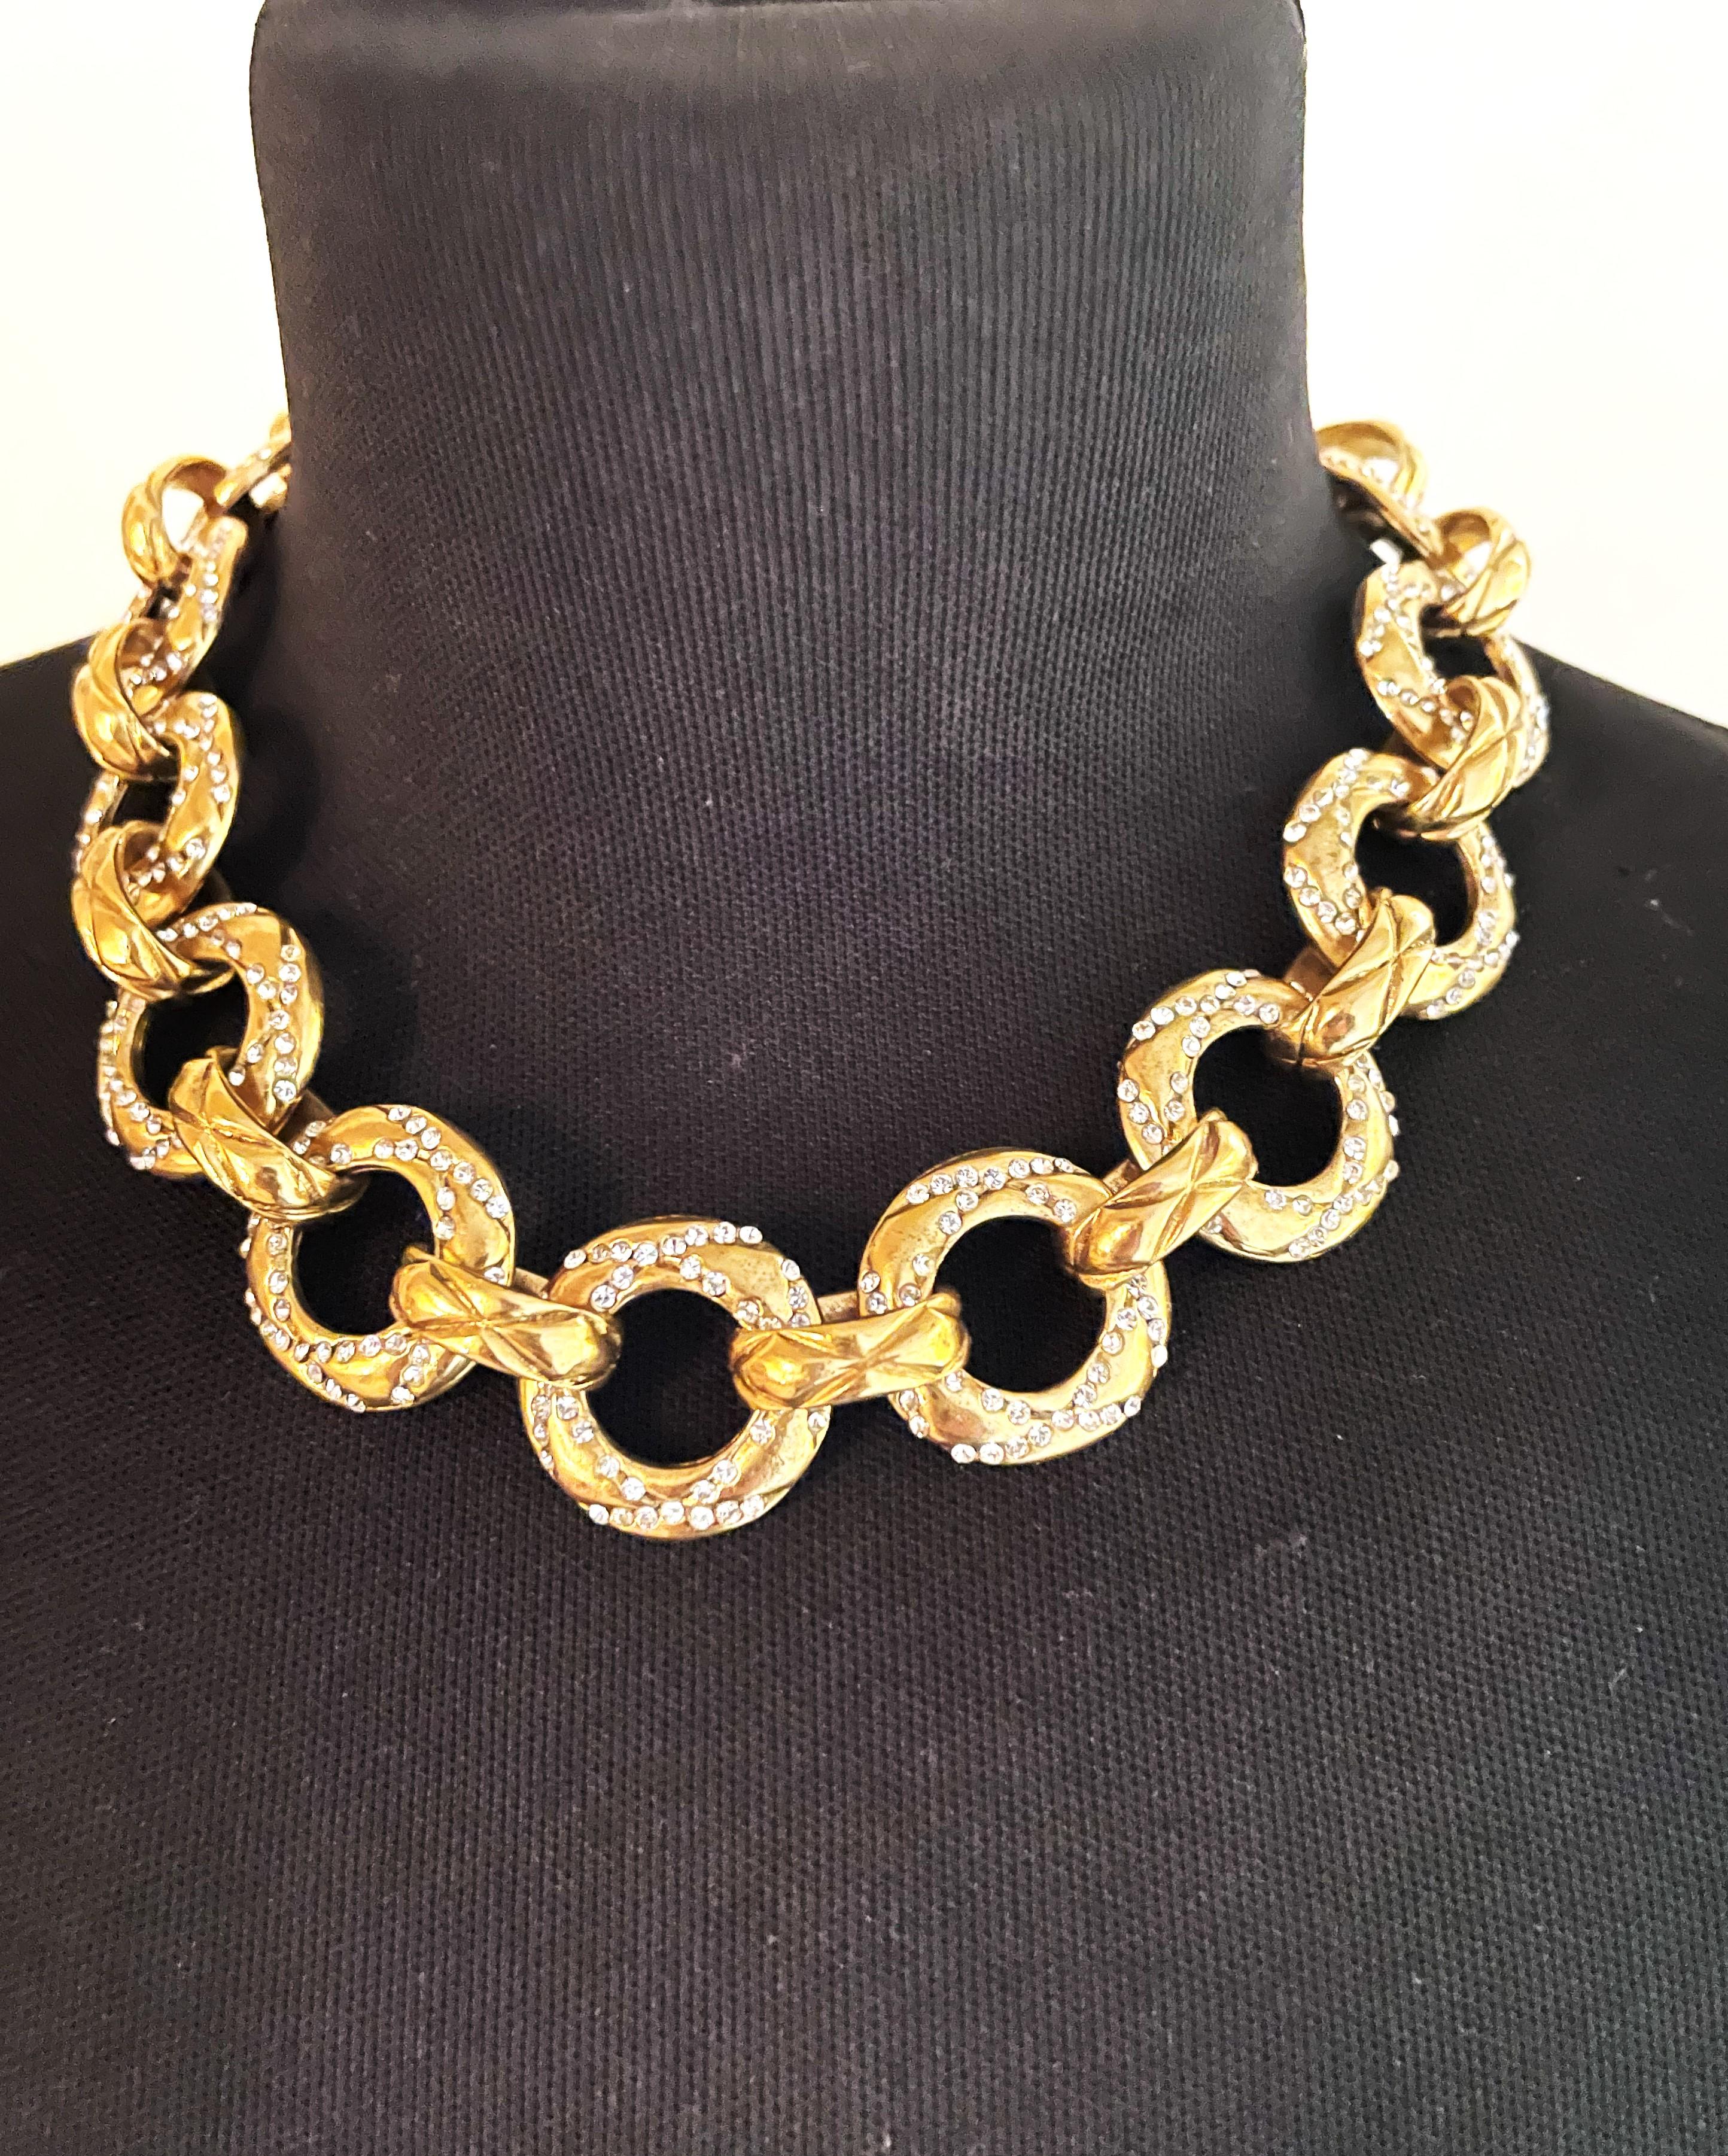 CHANEL NECKLACE BY K. LAGERFELD & V. de CASTELLANE, Crystals, gold plated 1991  For Sale 2